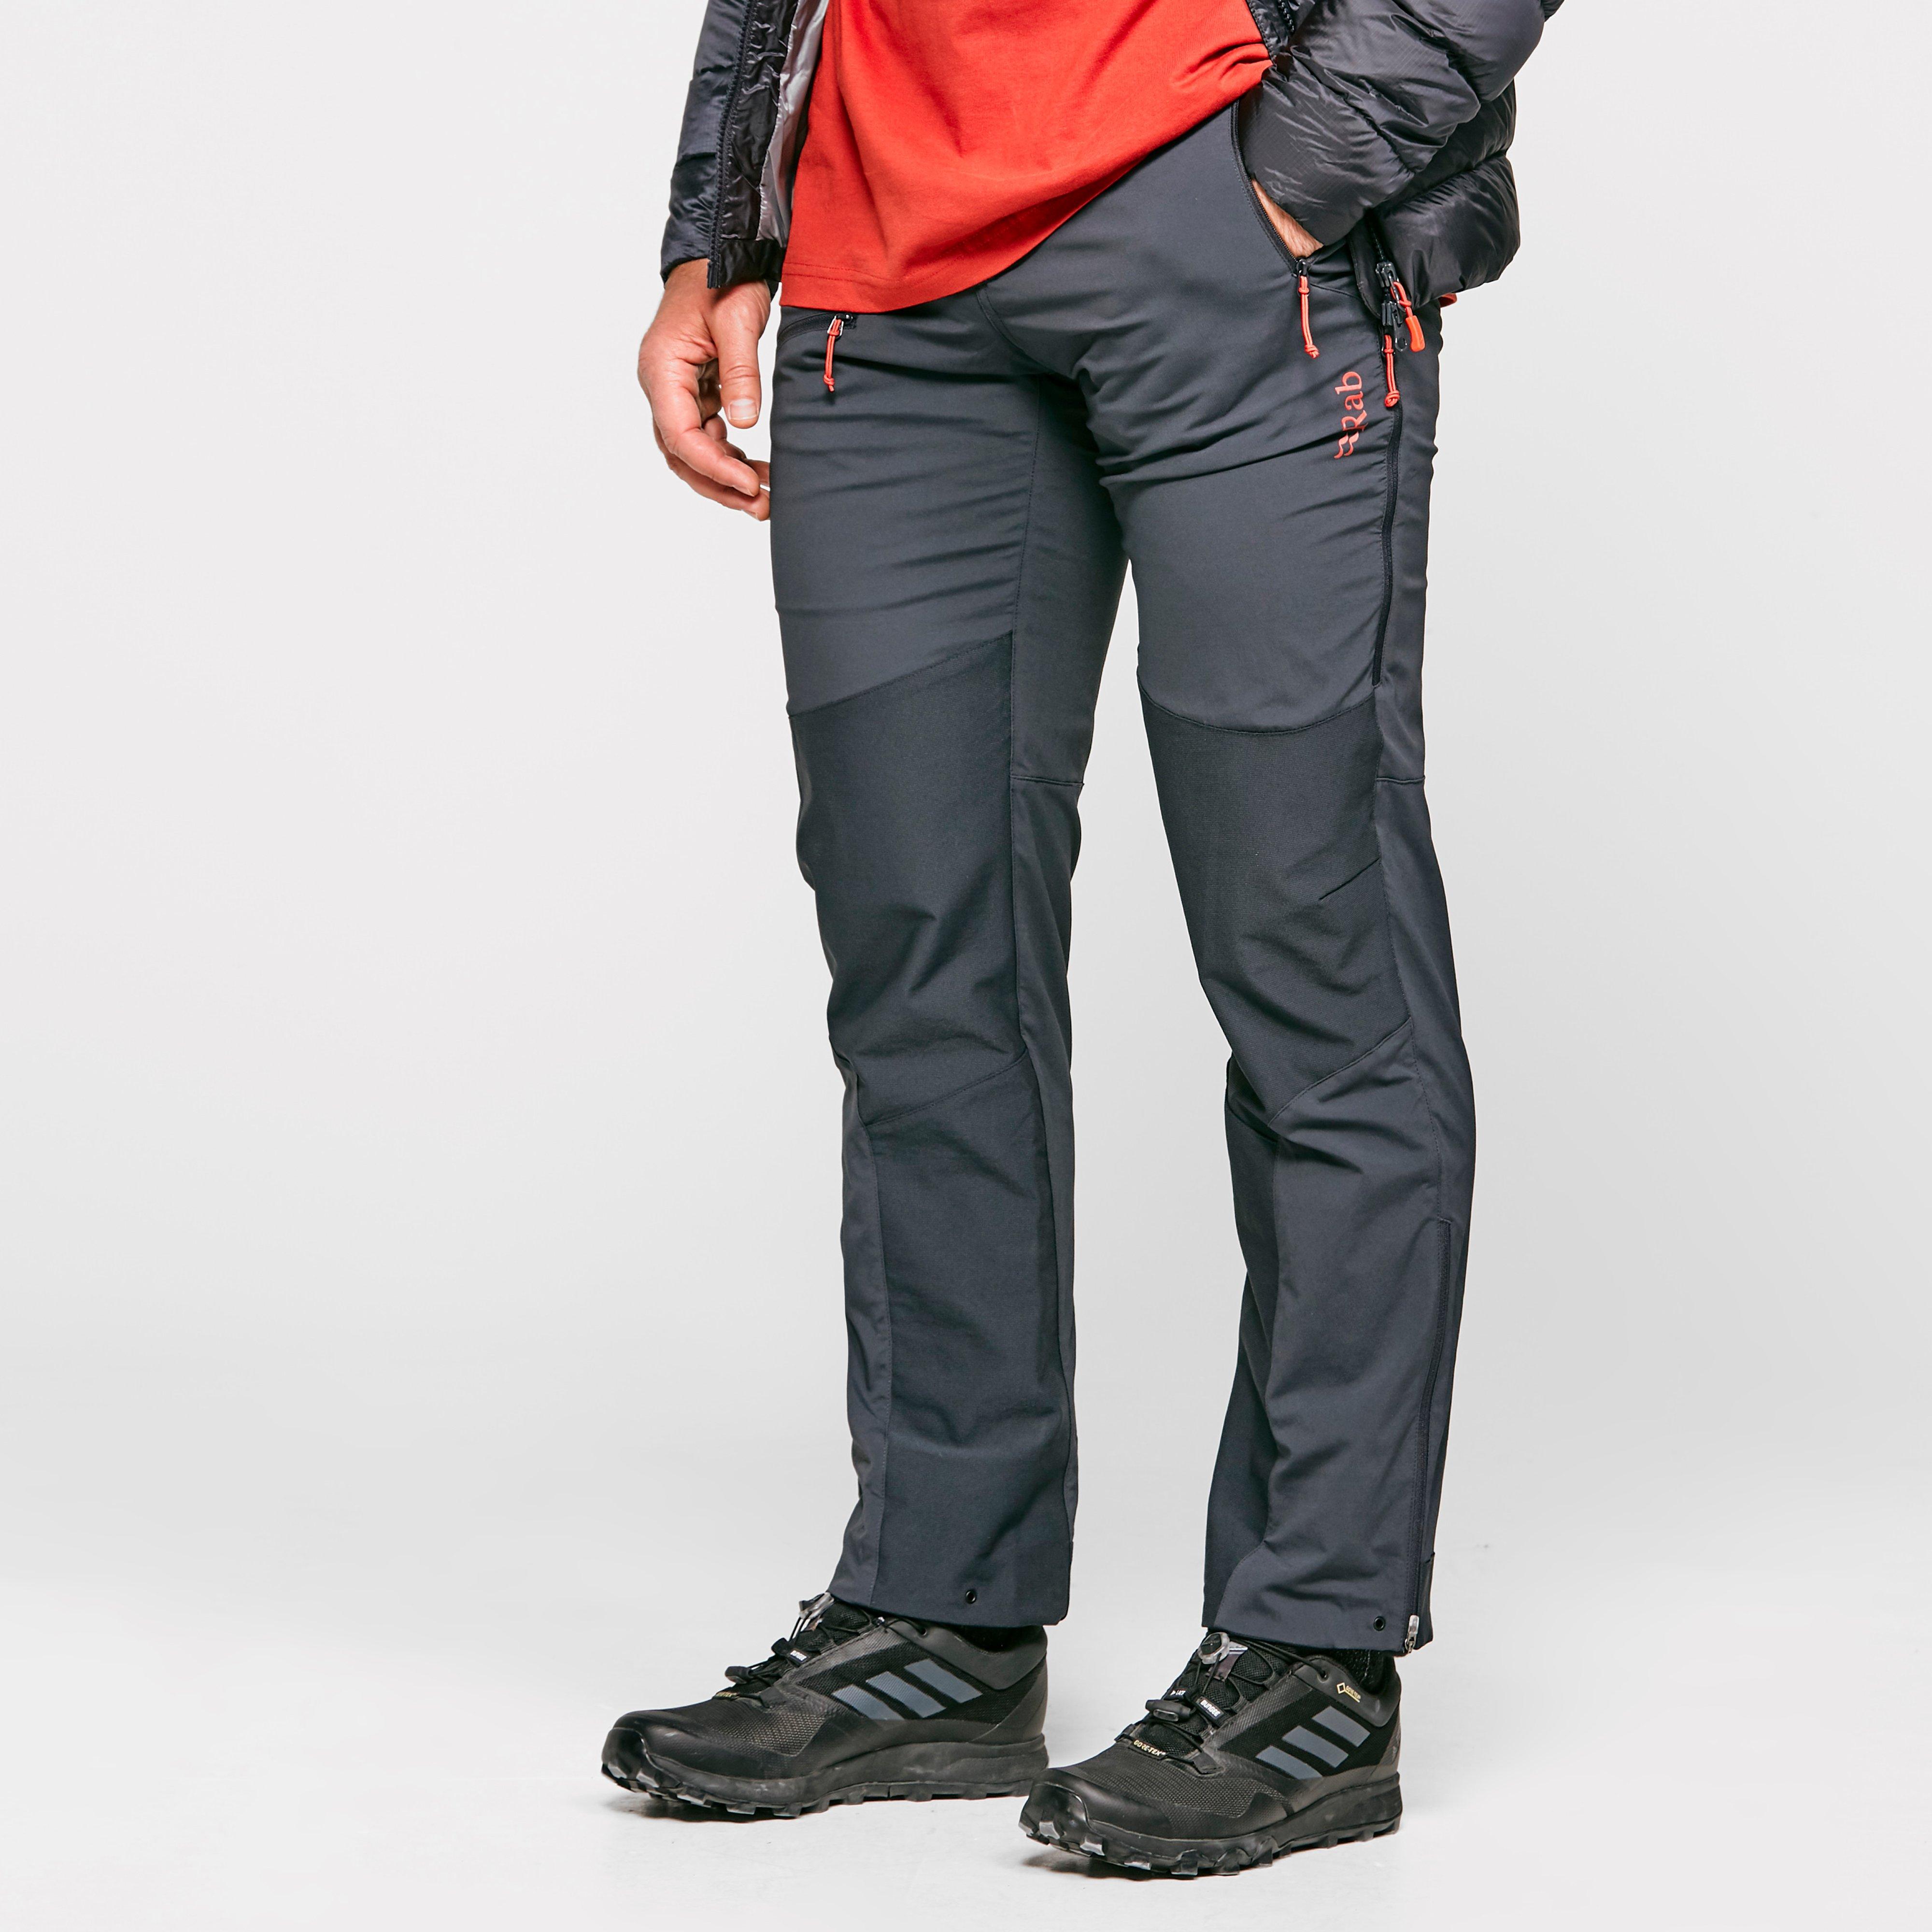 Rab Mens Torque Vr Pants - Gry/gry  Gry/gry